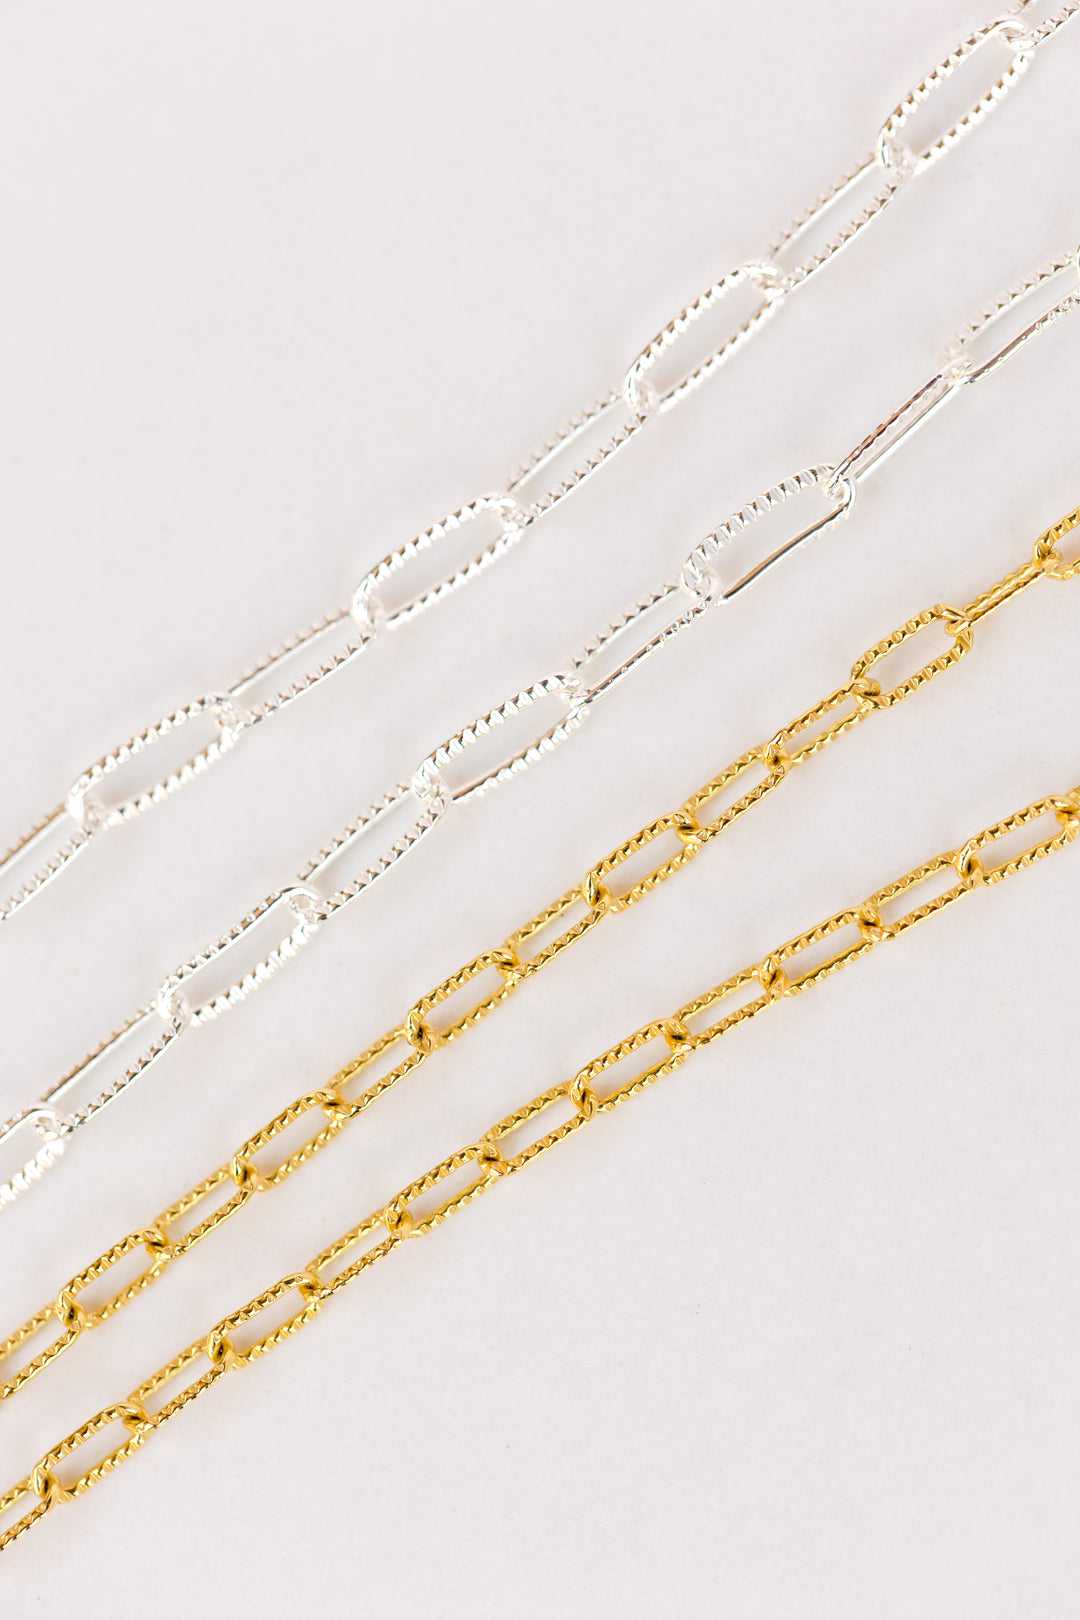 Sterling Silver and gold chain necklaces by Anna Shae Jewelry in Lexington, Kentucky 